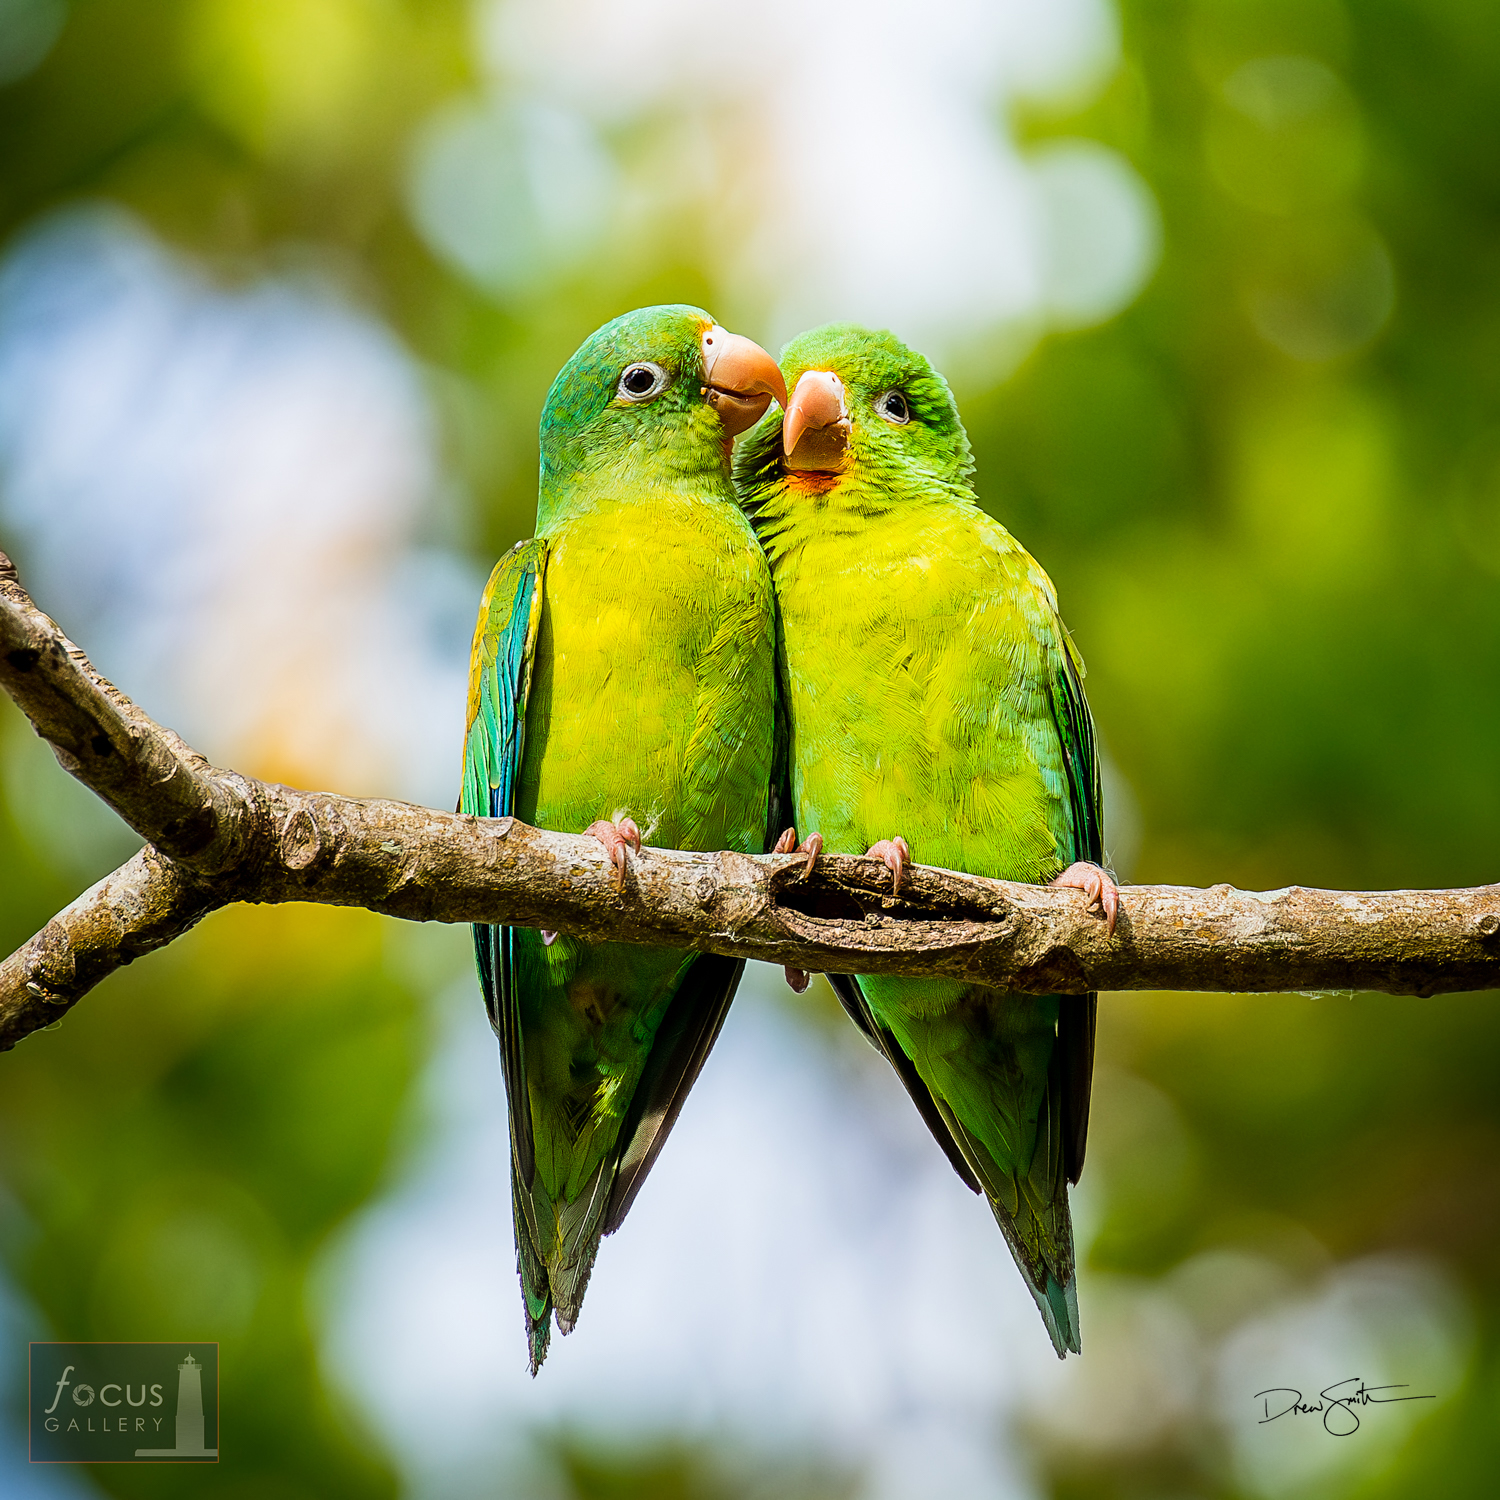 A pair   of Orange-Chinned Parakeets whisper sweet nothings to each other on a sunny   afternoon.  (Actually they are preening...